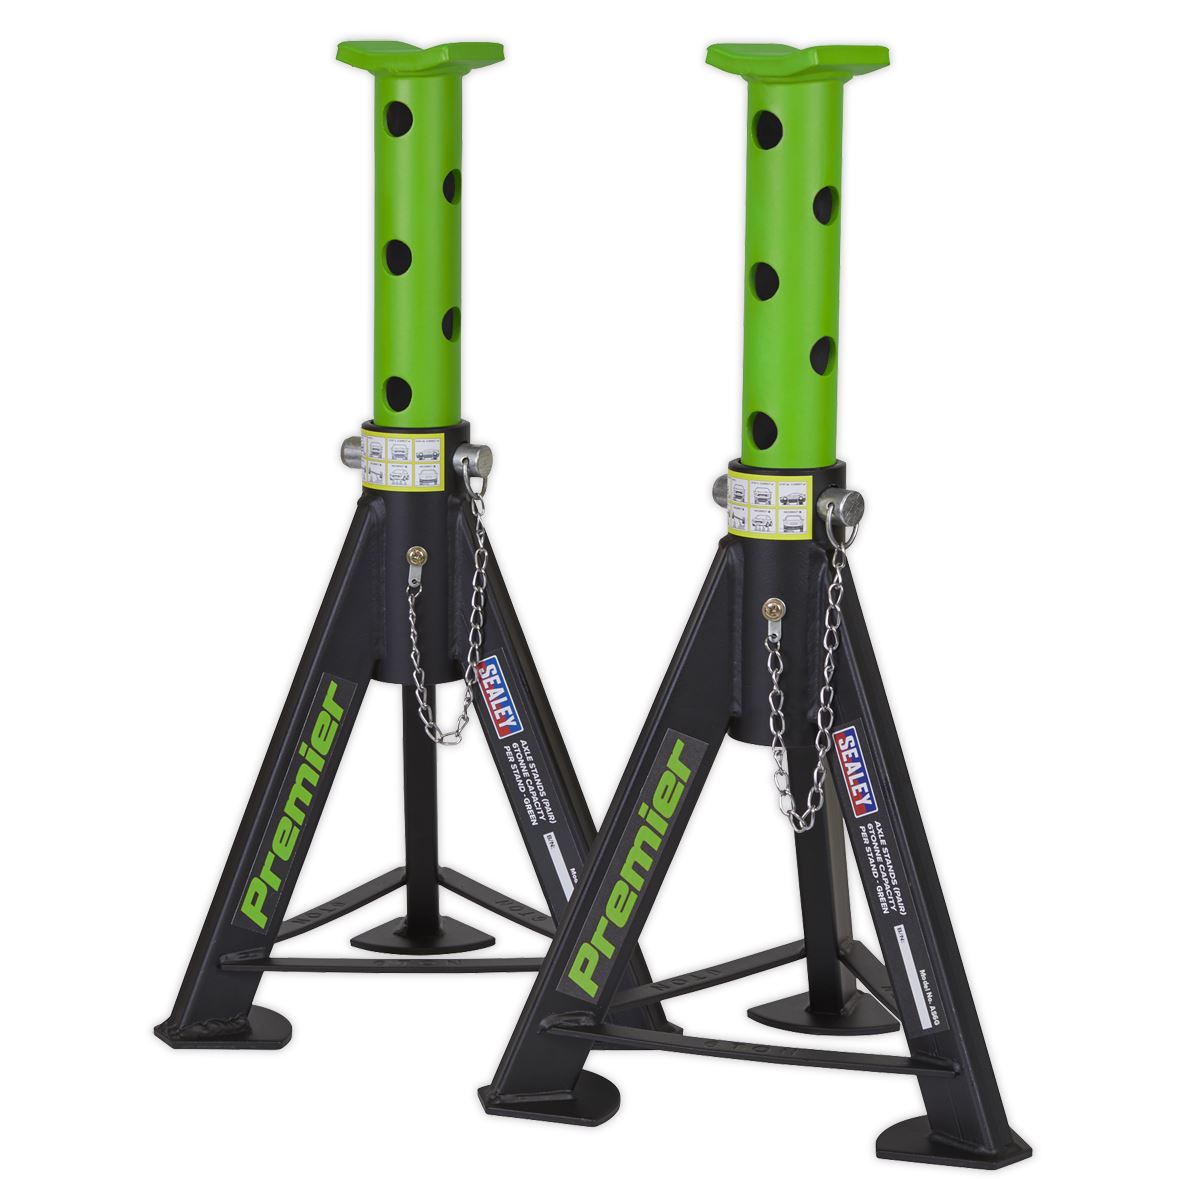 Sealey Premier Axle Stands (Pair) 6 Tonne Capacity per Stand - Green